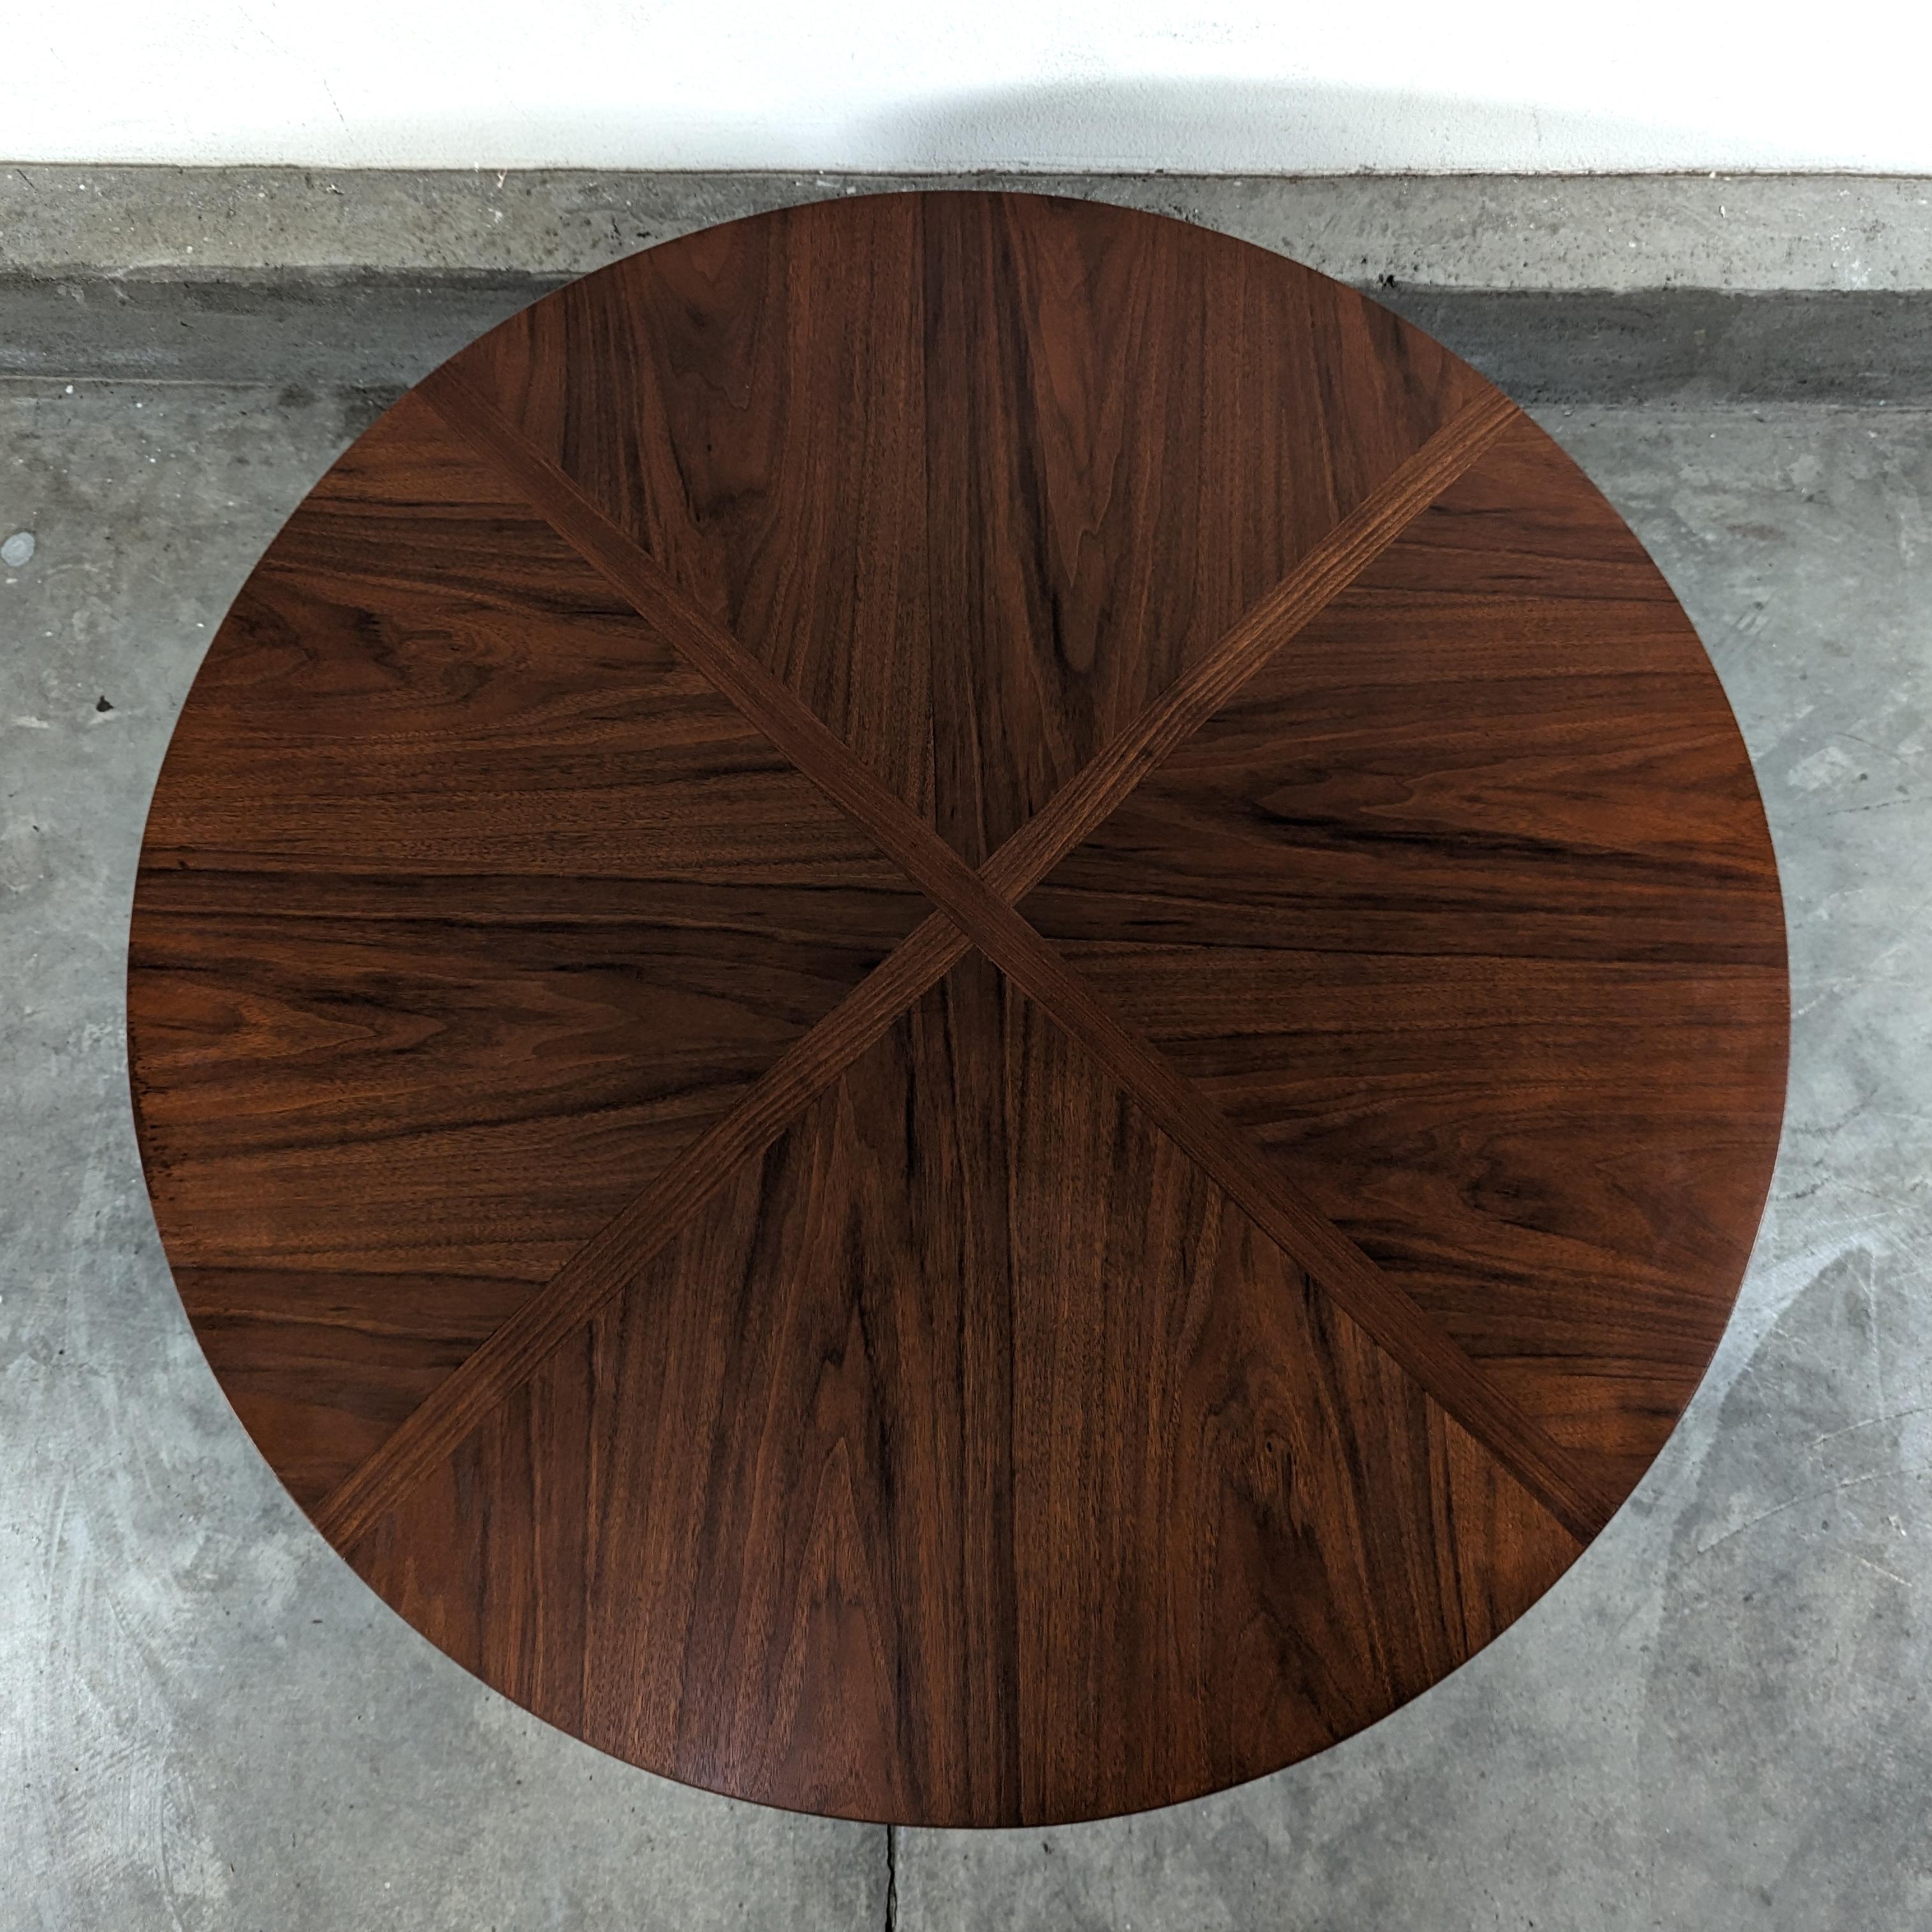 Elevate your living space with this exquisite vintage mid-century modern walnut table that exudes timeless elegance and sophistication. This stunning piece is in overall excellent condition, having been lovingly refinished to showcase its natural